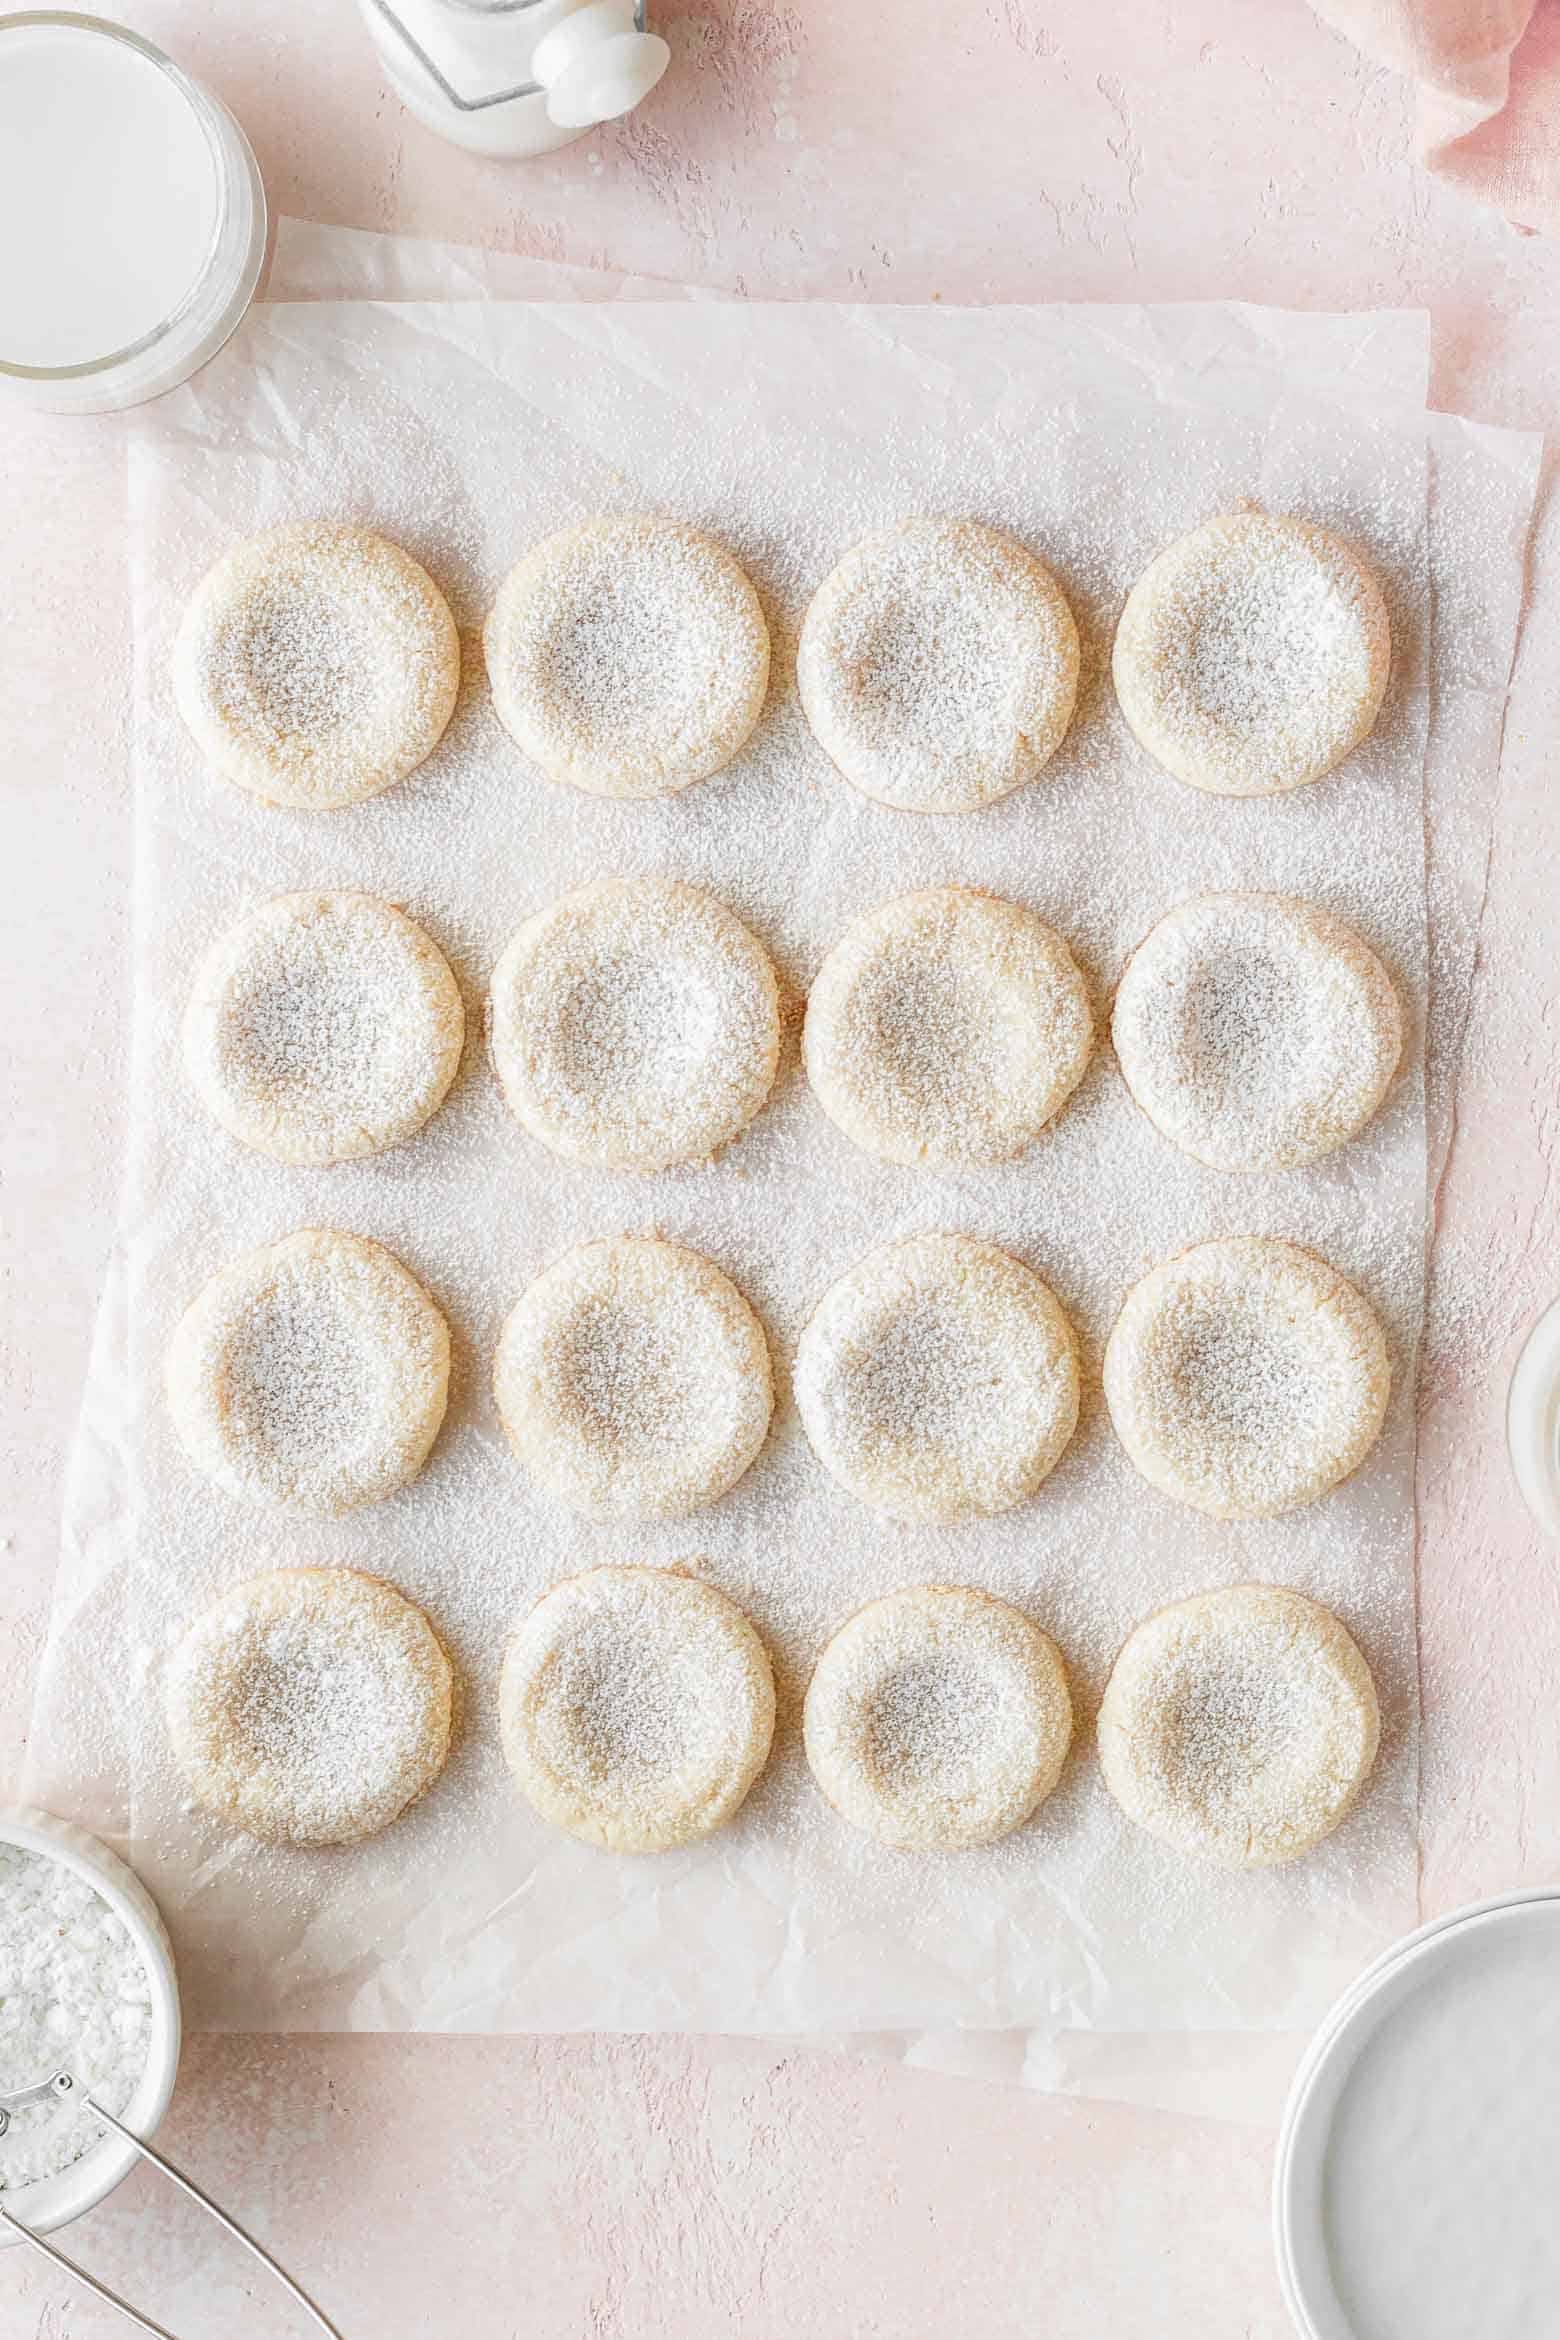 Vegan cookies dusted with powdered sugar.